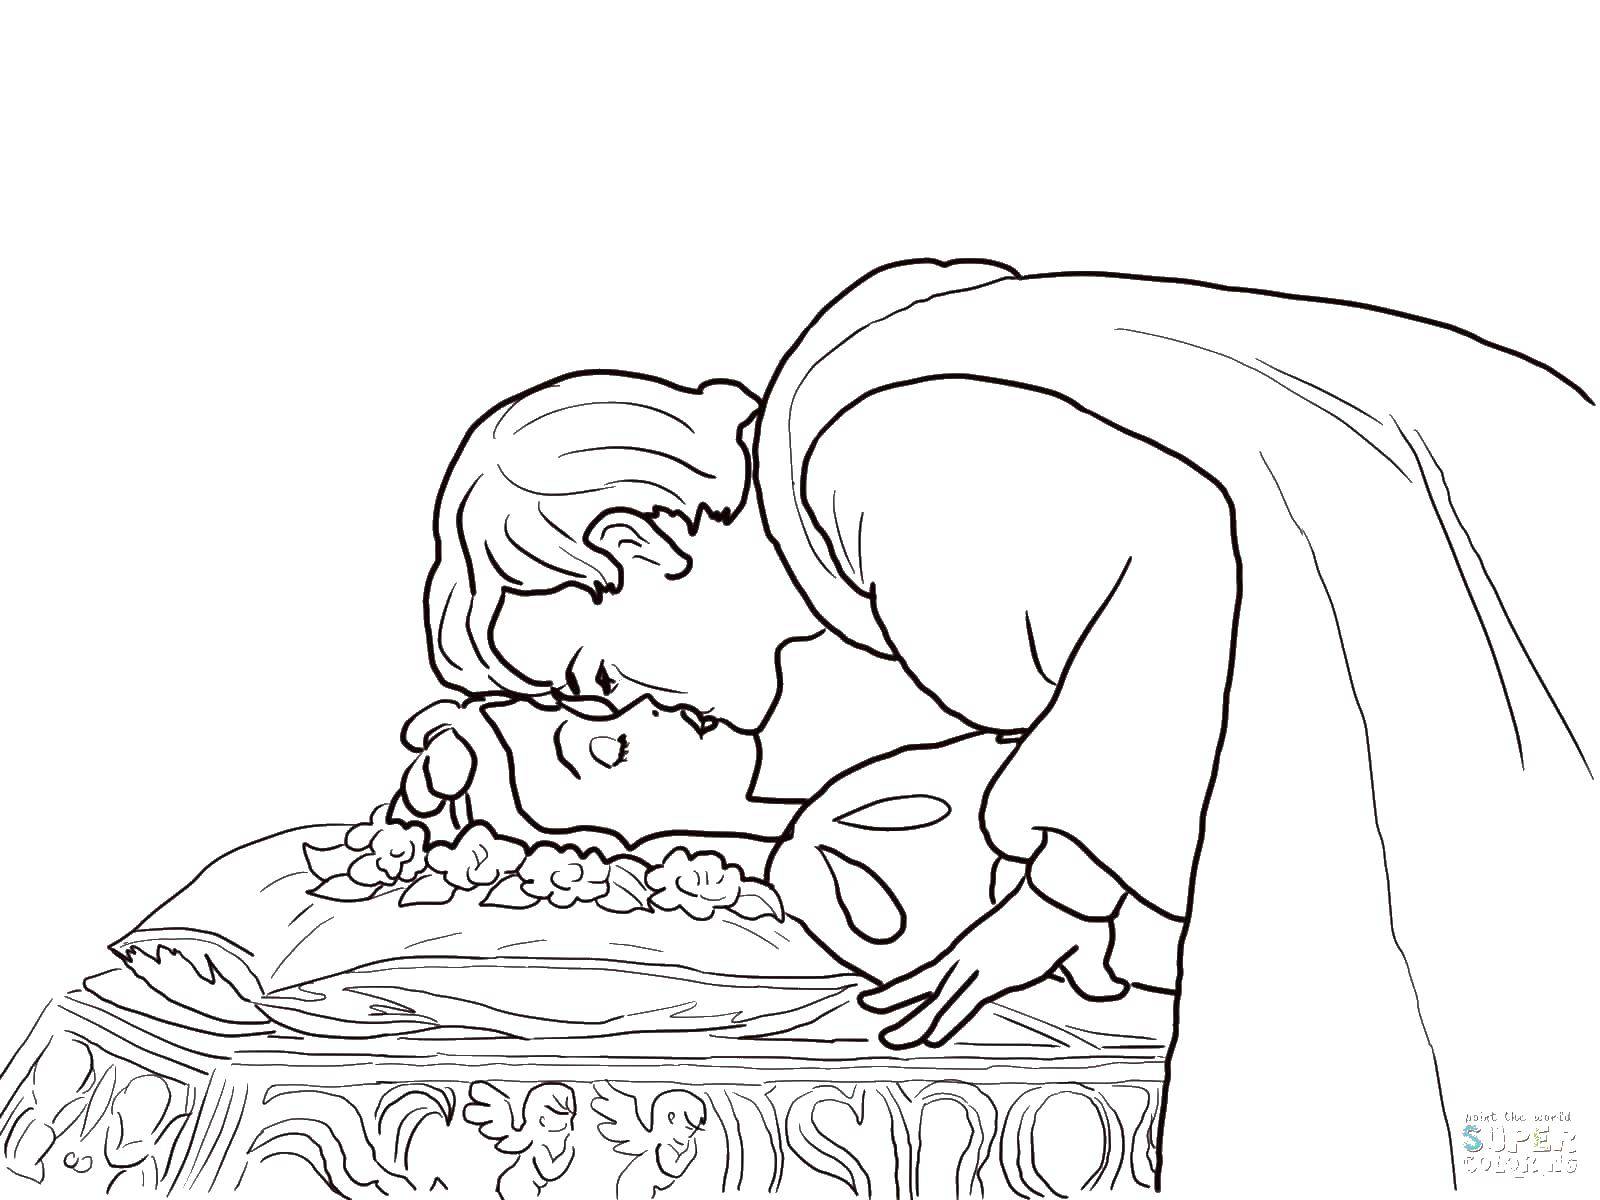 Coloring The Prince kisses snow white. Category snow white. Tags:  princesses, cartoons, fairy tales, Snow white.